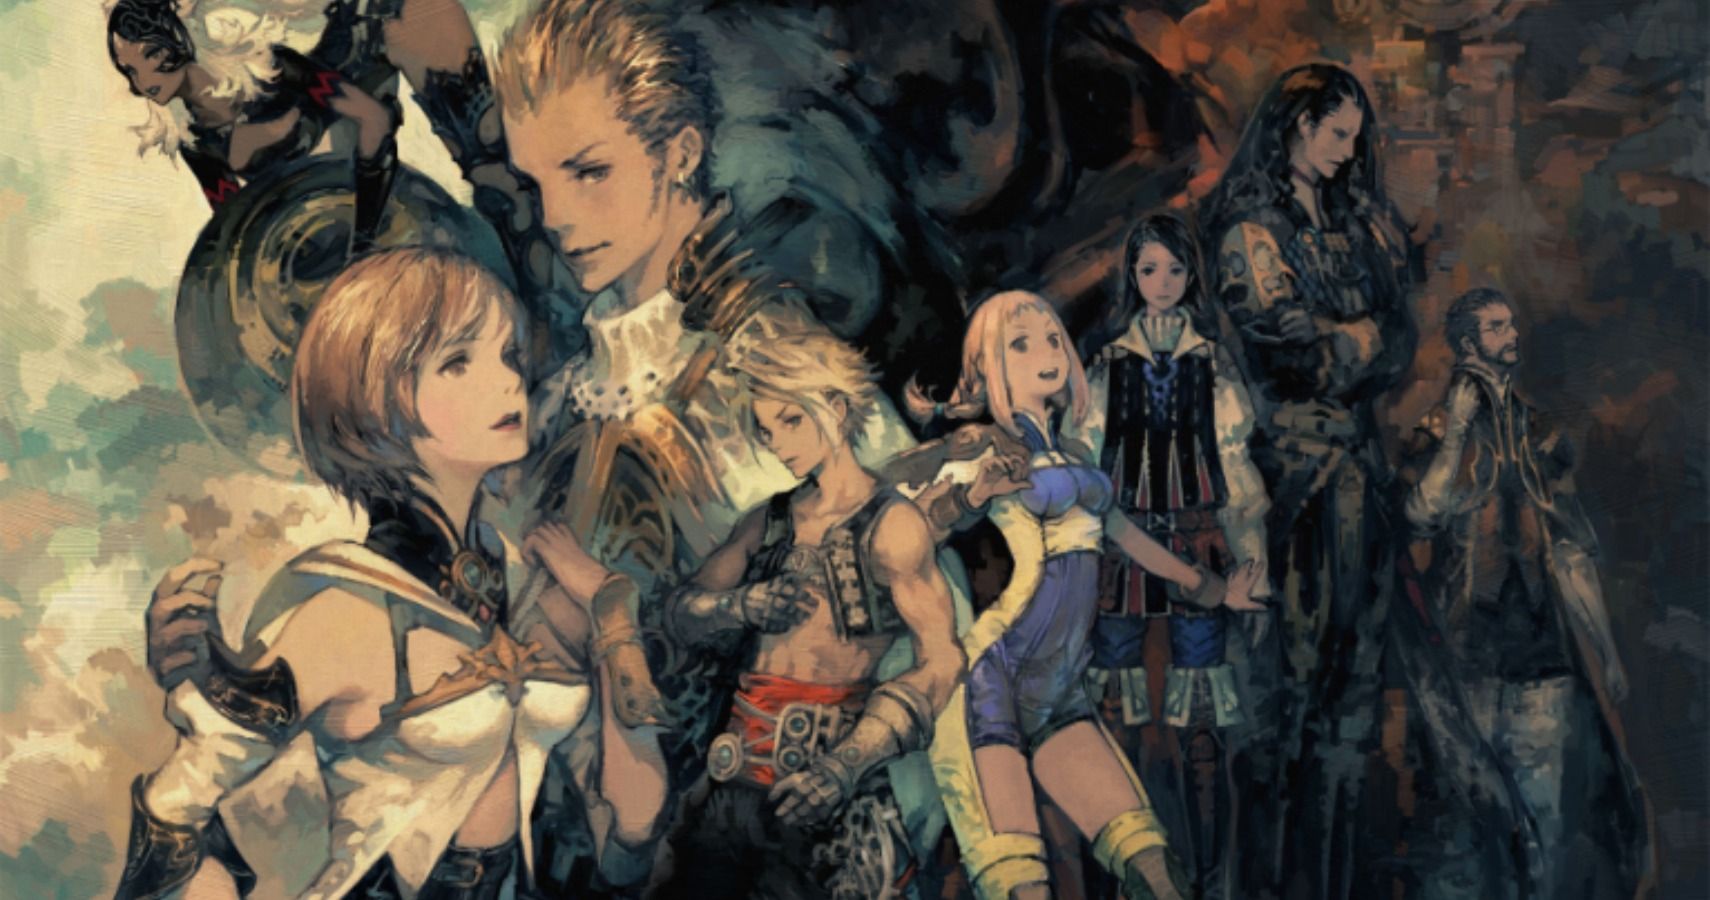 Final Fantasy XII Steam update removes Denuvo DRM and adds new features